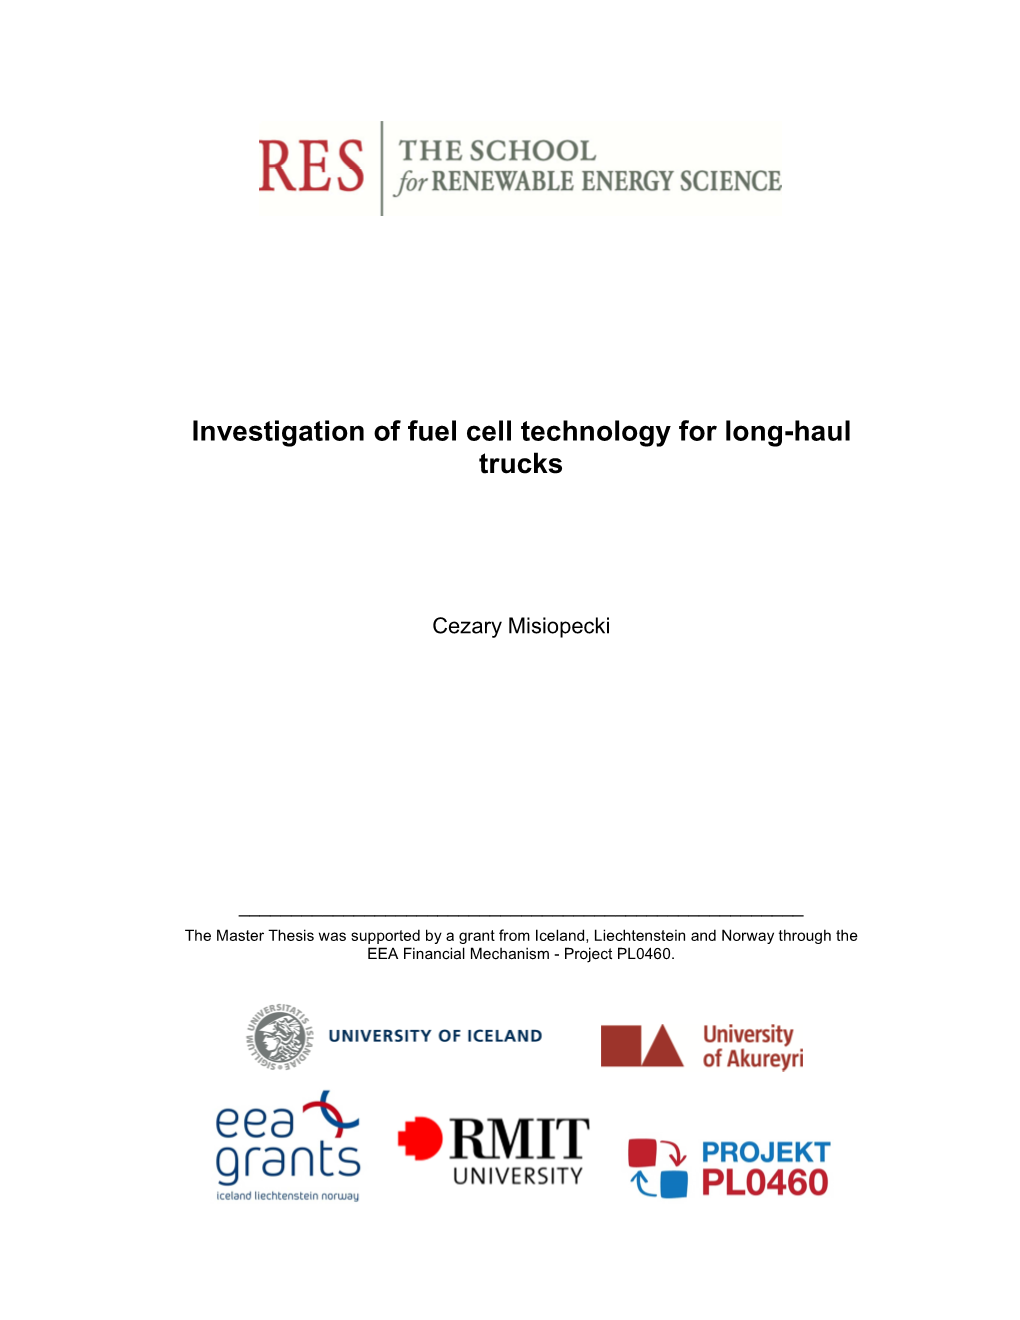 Investigation of Fuel Cell Technology for Long-Haul Trucks